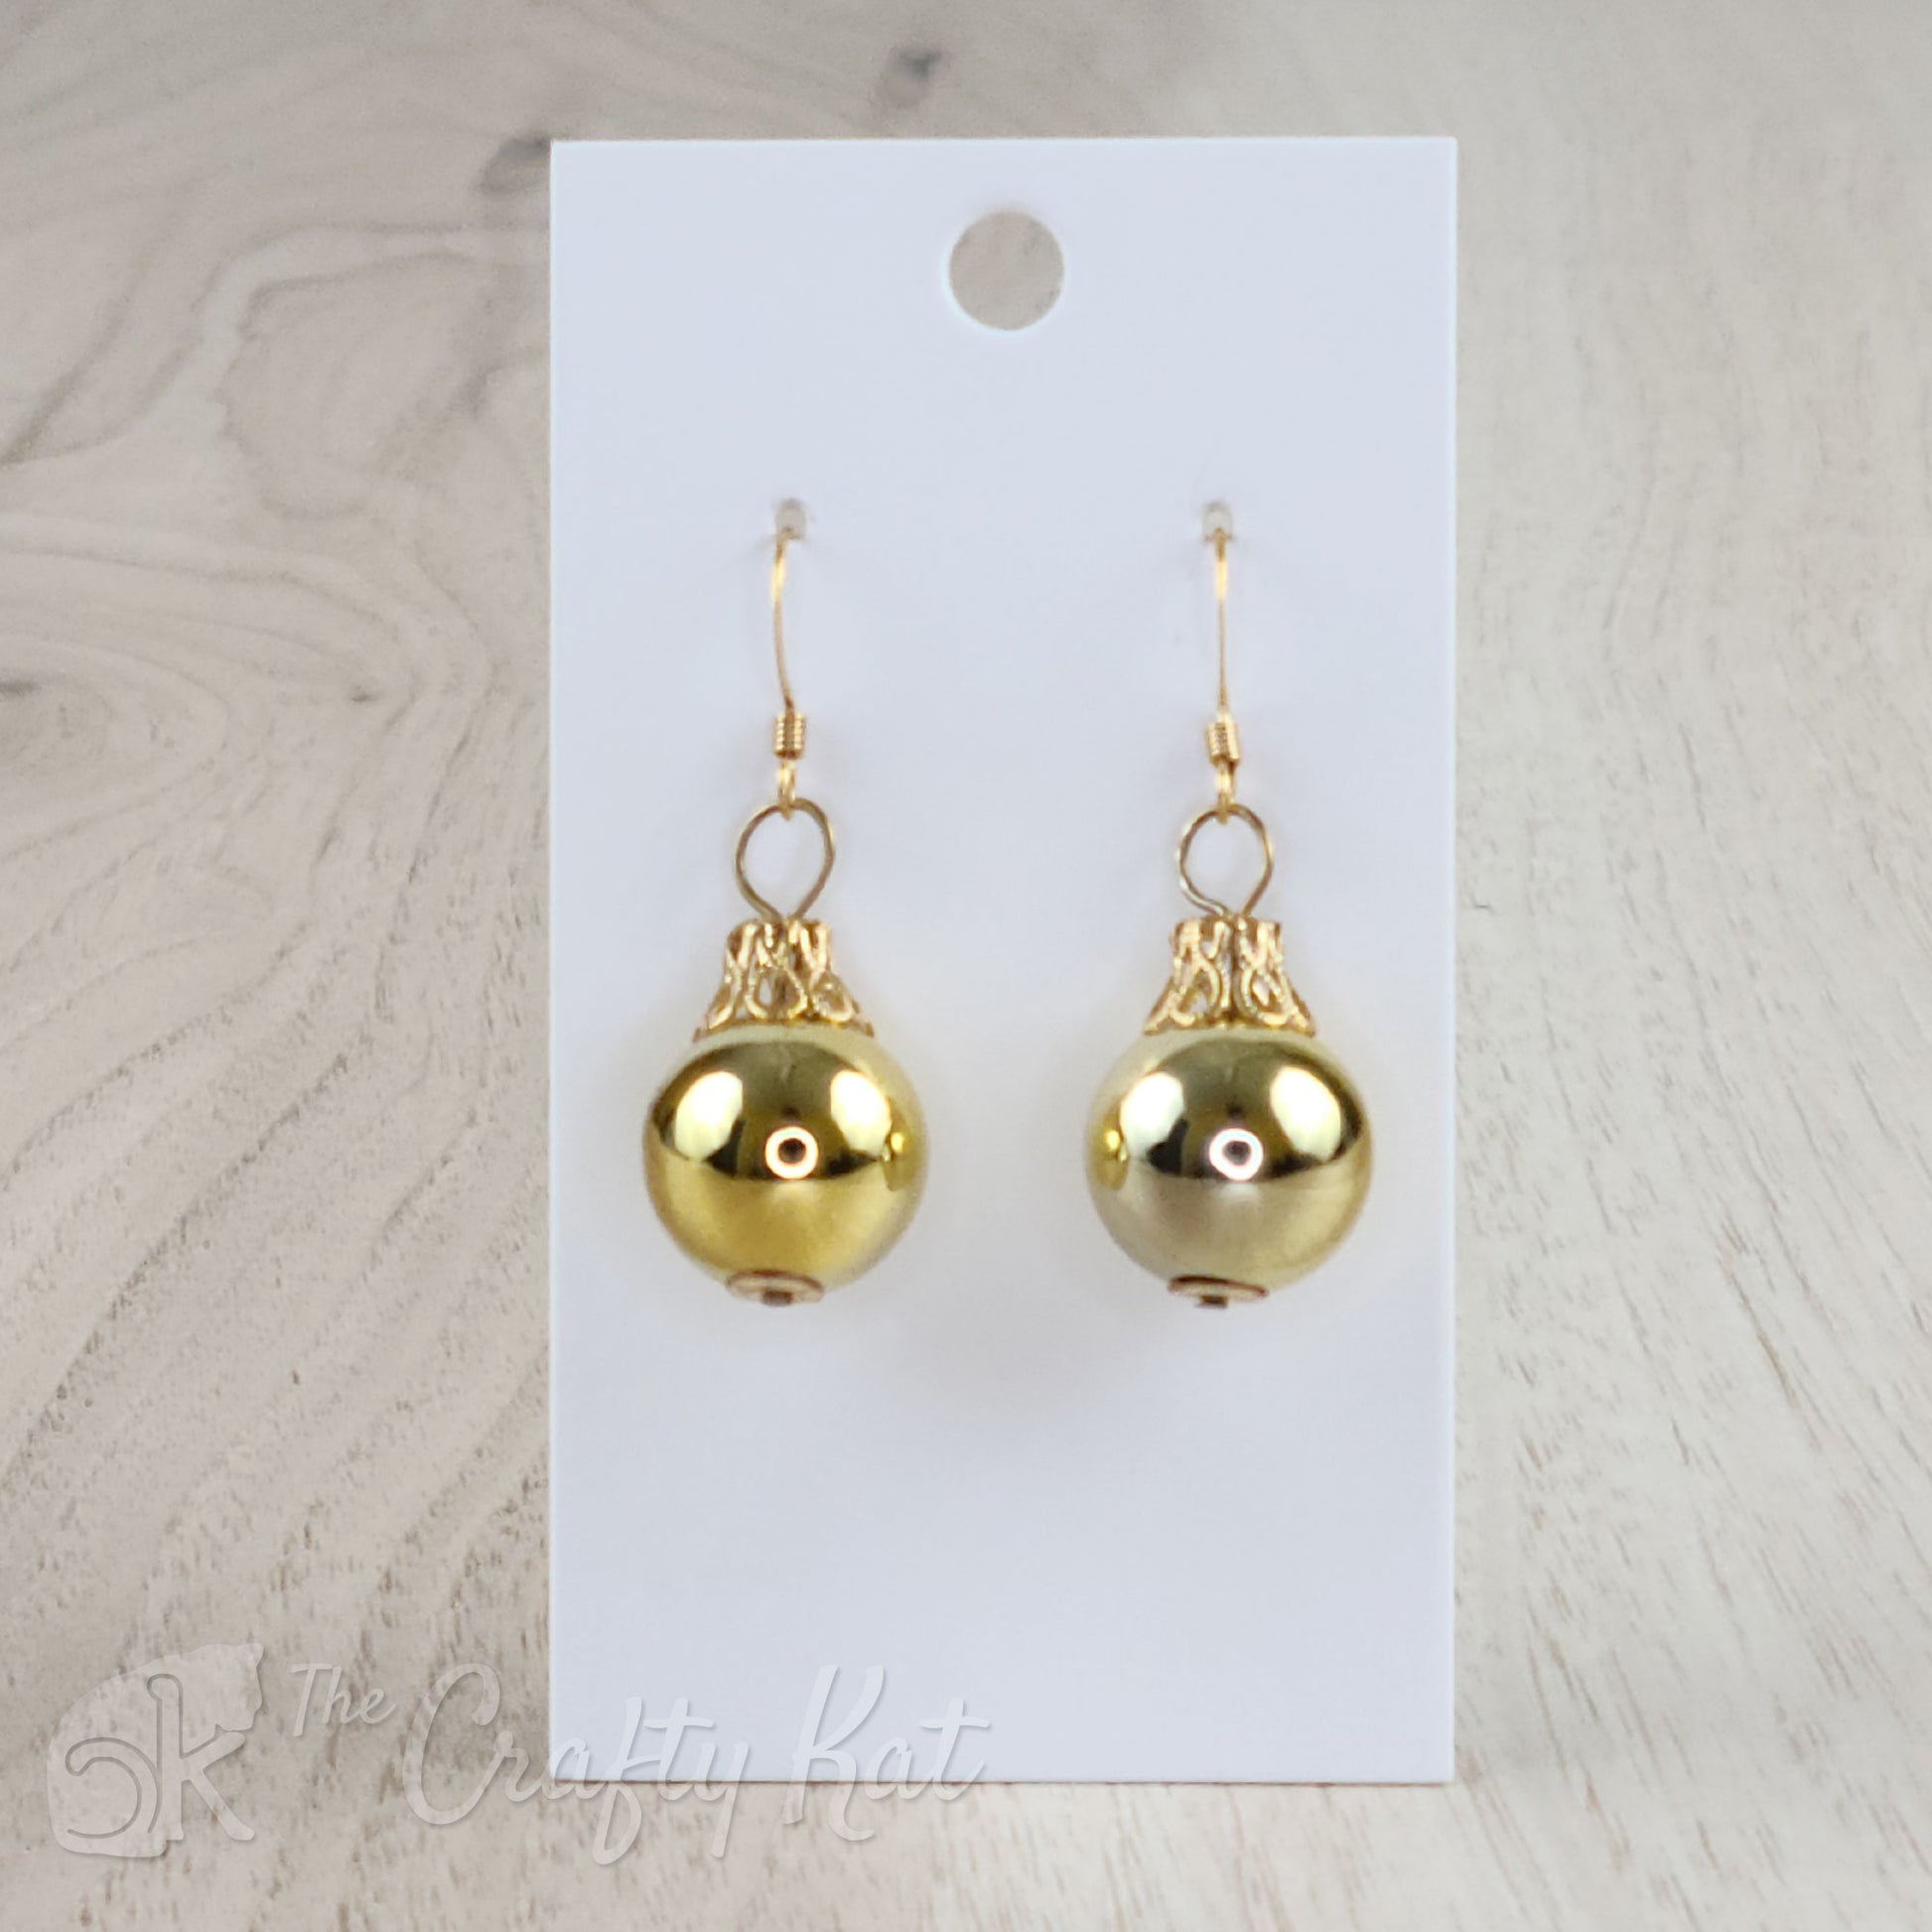 Each earring is a gold globe with a gold-plated filigree cap, giving each the appearance of a classic holiday tree ornament.